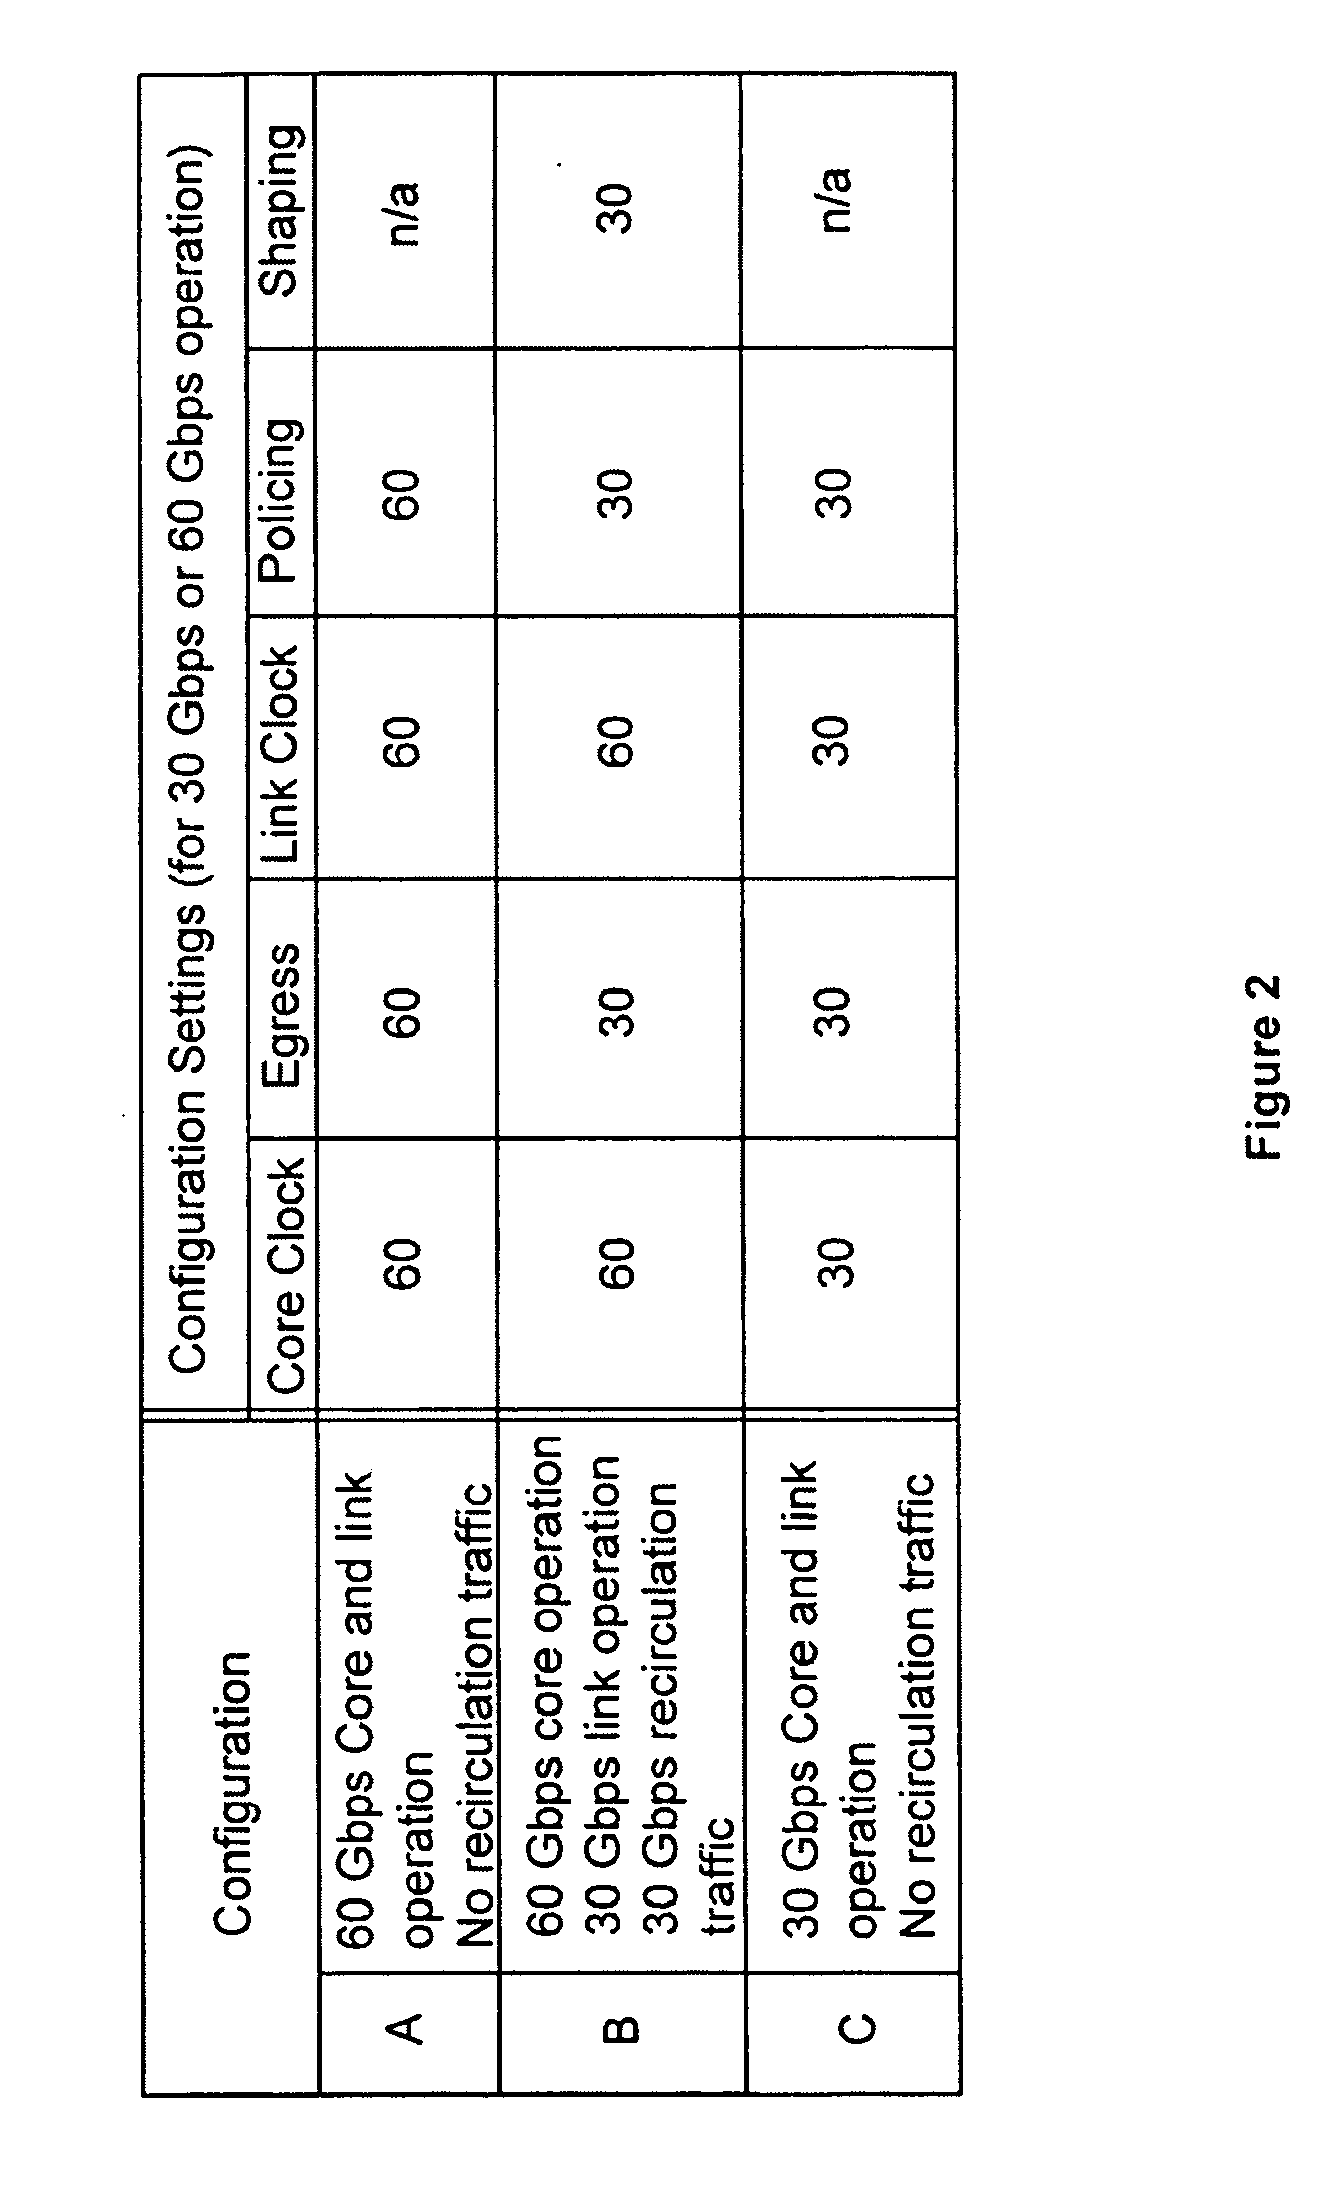 Thermally flexible and performance scalable packet processing circuit card